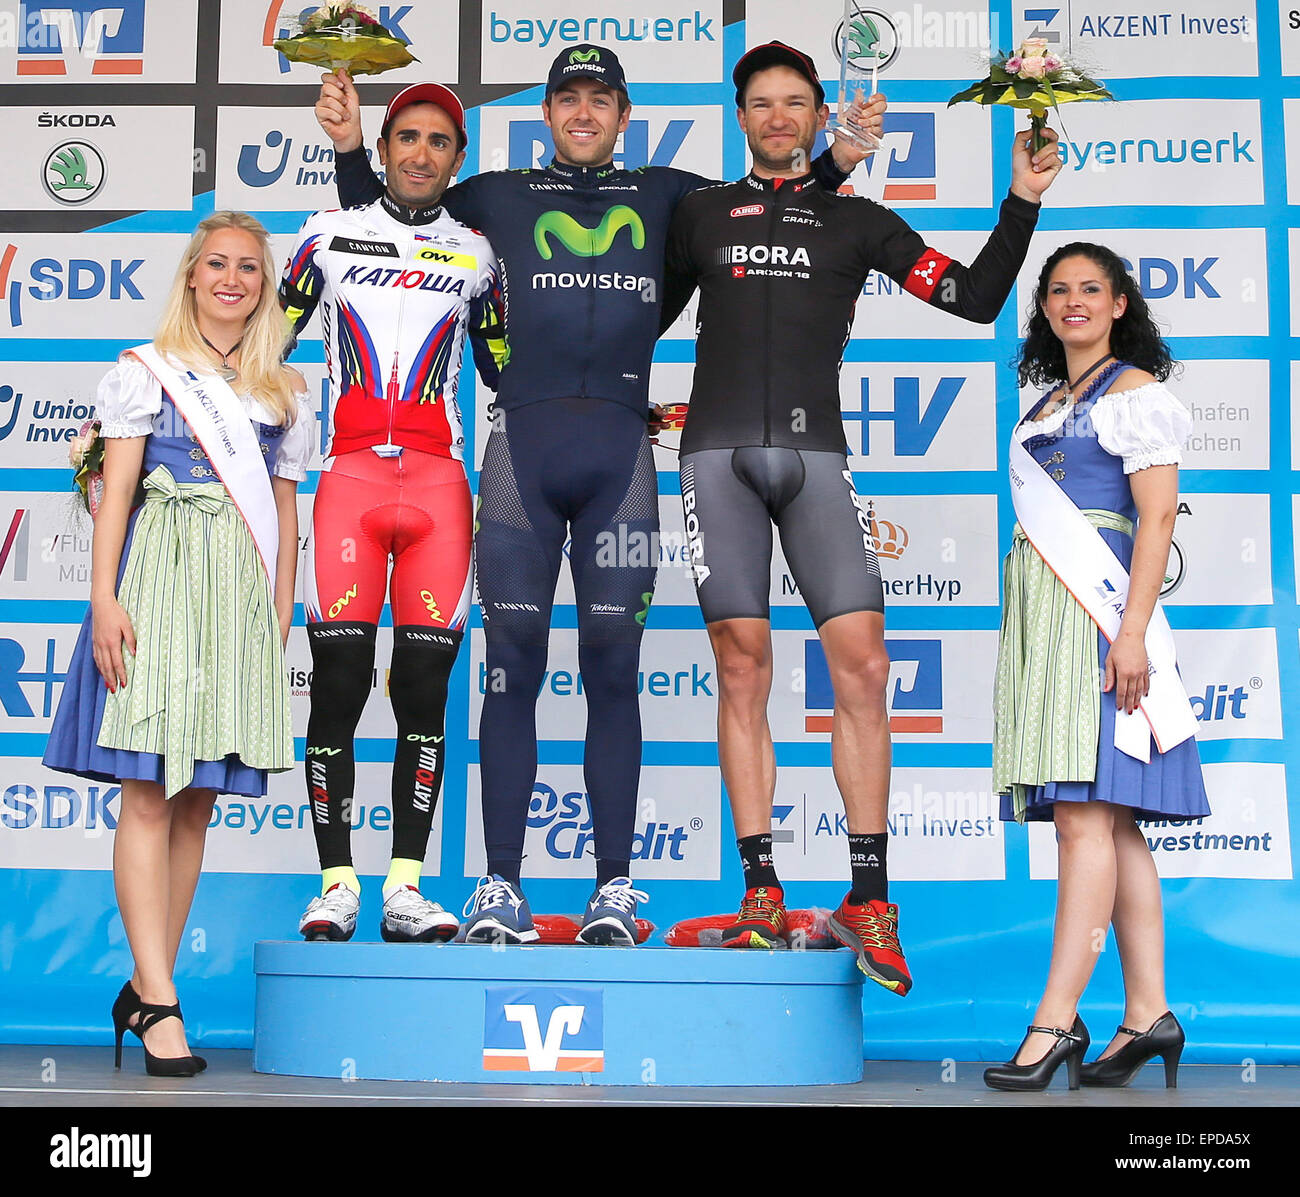 Hassfurt, Germany. 15th May, 2015. HANDOUT - (l-r) Thiago Machado (2nd place), Alex Dowsett (1st place) and Jan Barta (3rd place), oise on the podium during the award ceremony after the bicycle race International Bayern Rundfahrt (Tour of Bavaria) in Hassfurt, Germany, 15 May 2015. Photo: Bayern Rundfahrt/Rene Vigneron/dpaMANDATORY CREDITS: Photo: Bayern Rundfahrt/Rene Vigneron/dpa)/dpa/Alamy Live News Stock Photo